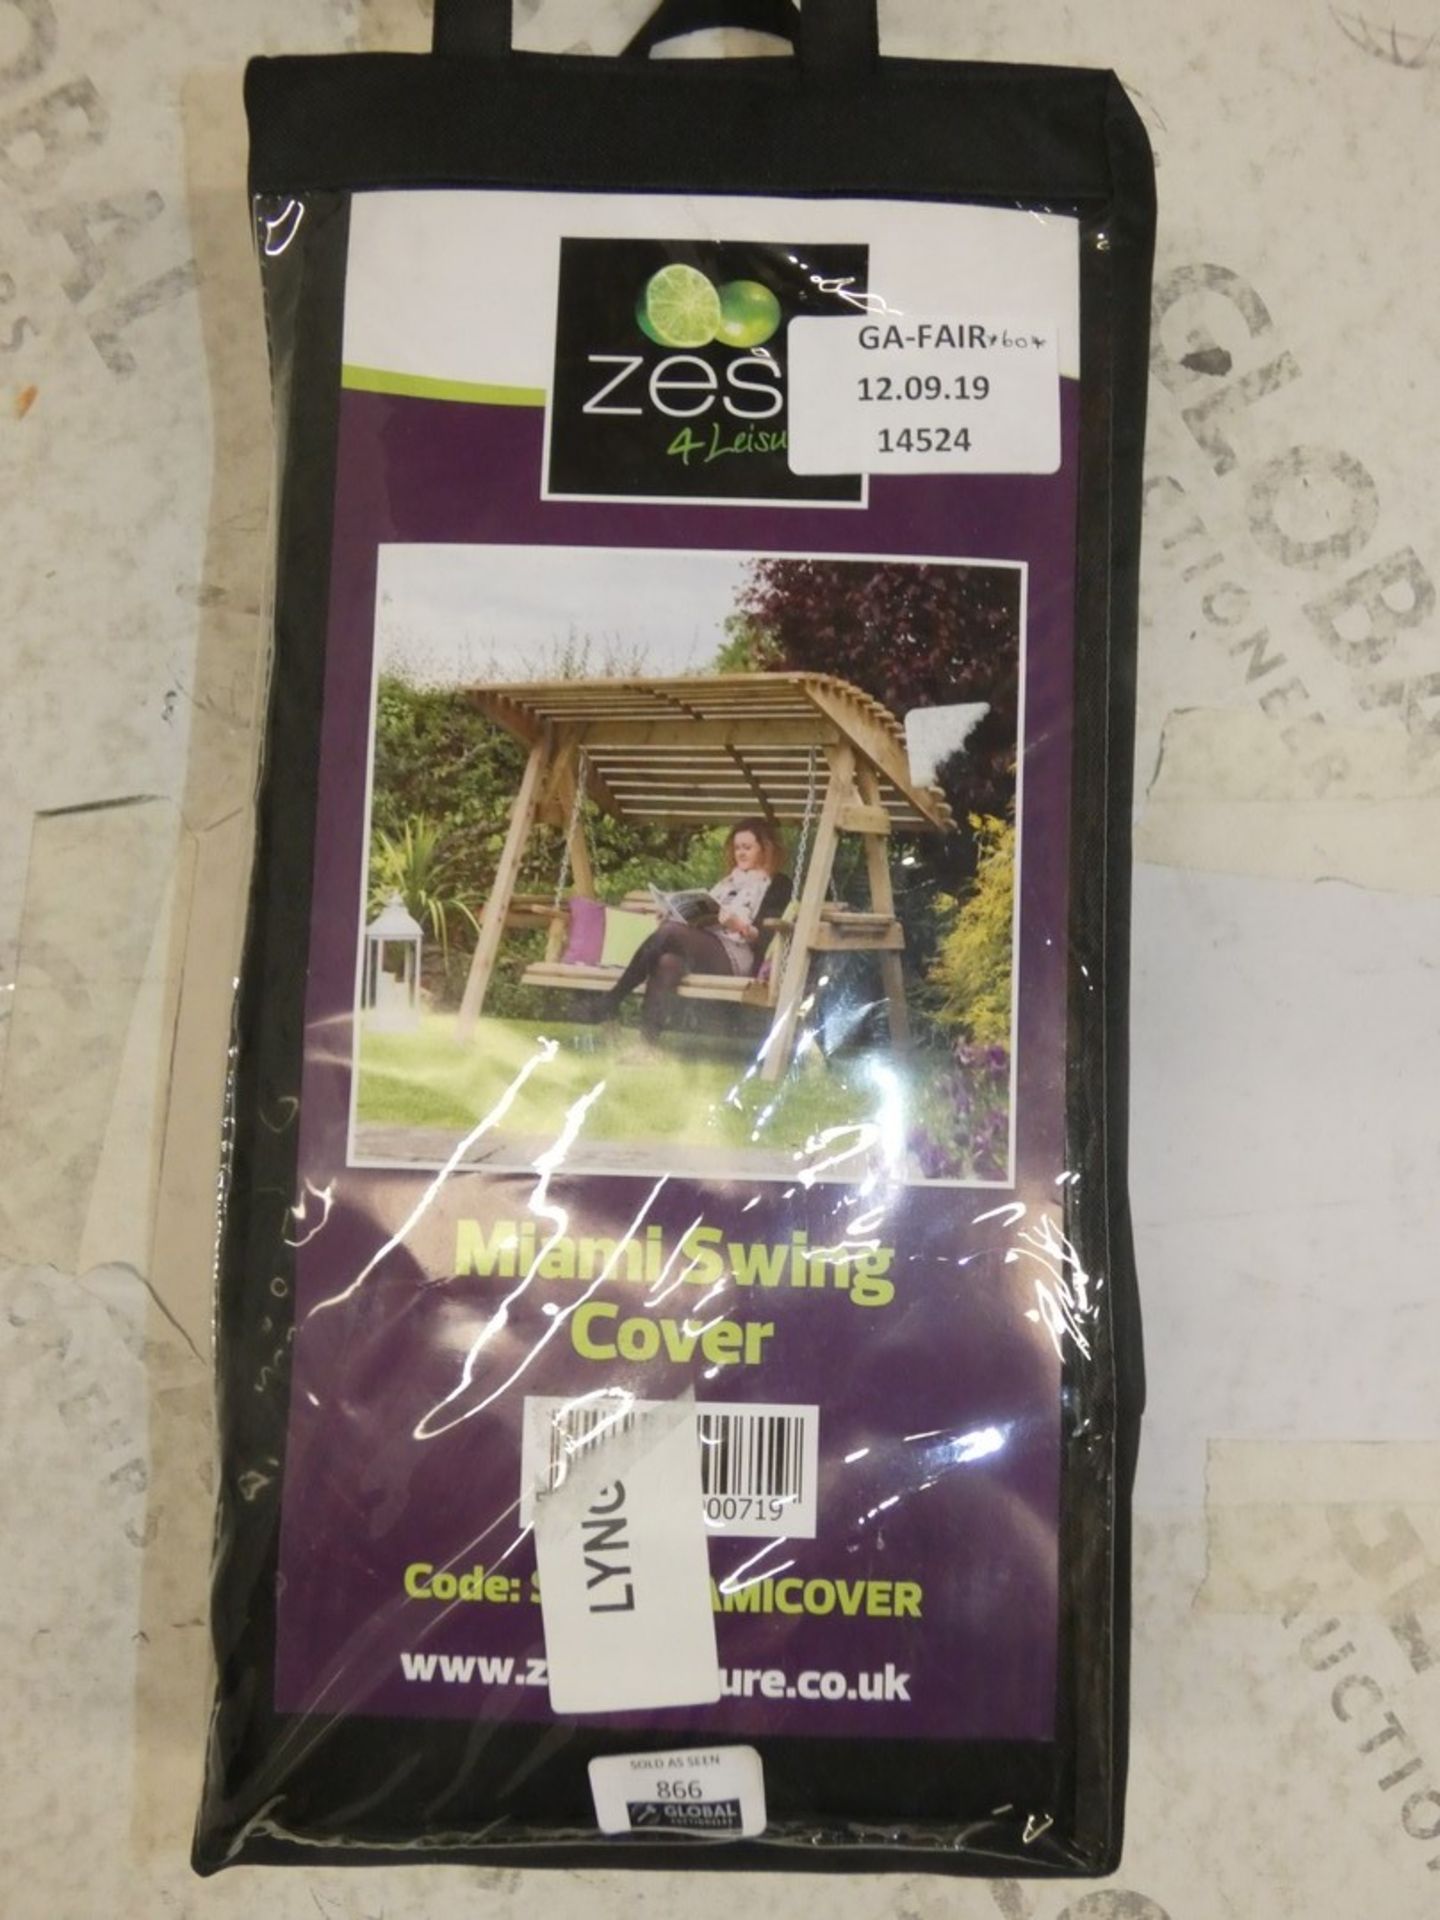 Boxed Zest For Leisure Miami Swing Cover RRP £60 (14524) (Public Viewing and Appraisals Available)